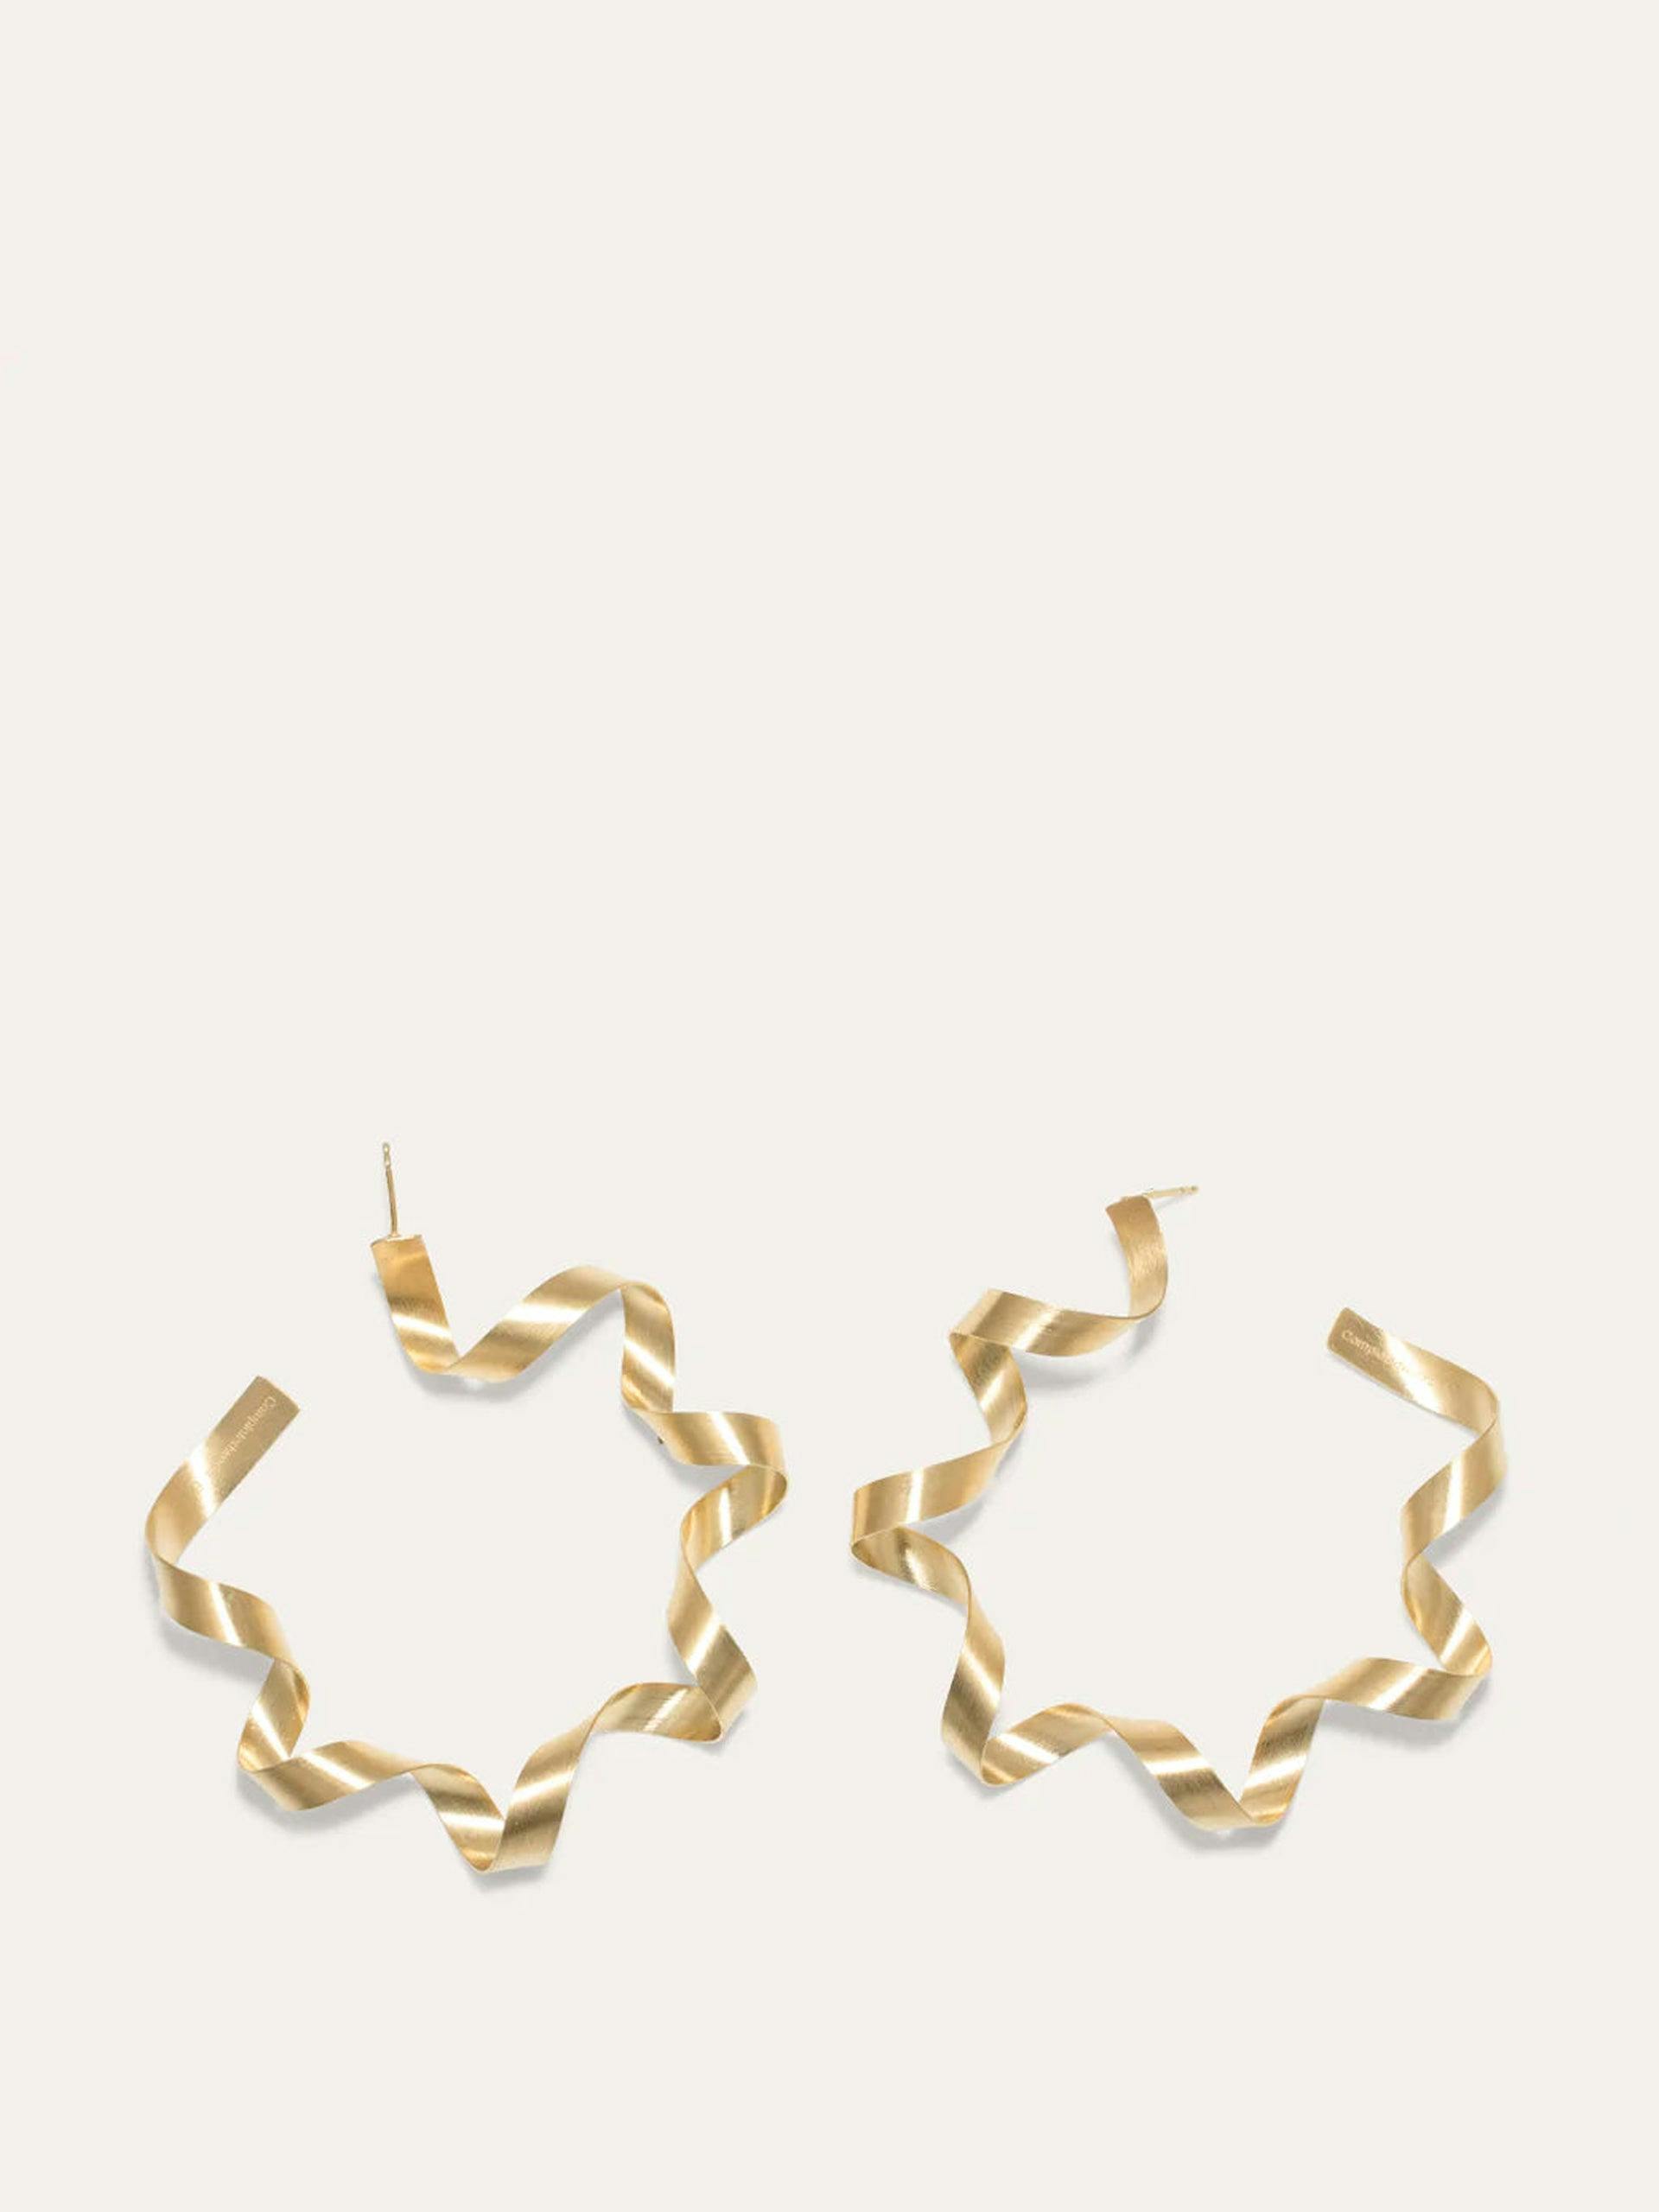 "This is What Happens When the Paper Shredder Malfunctions I" gold vermeil earrings